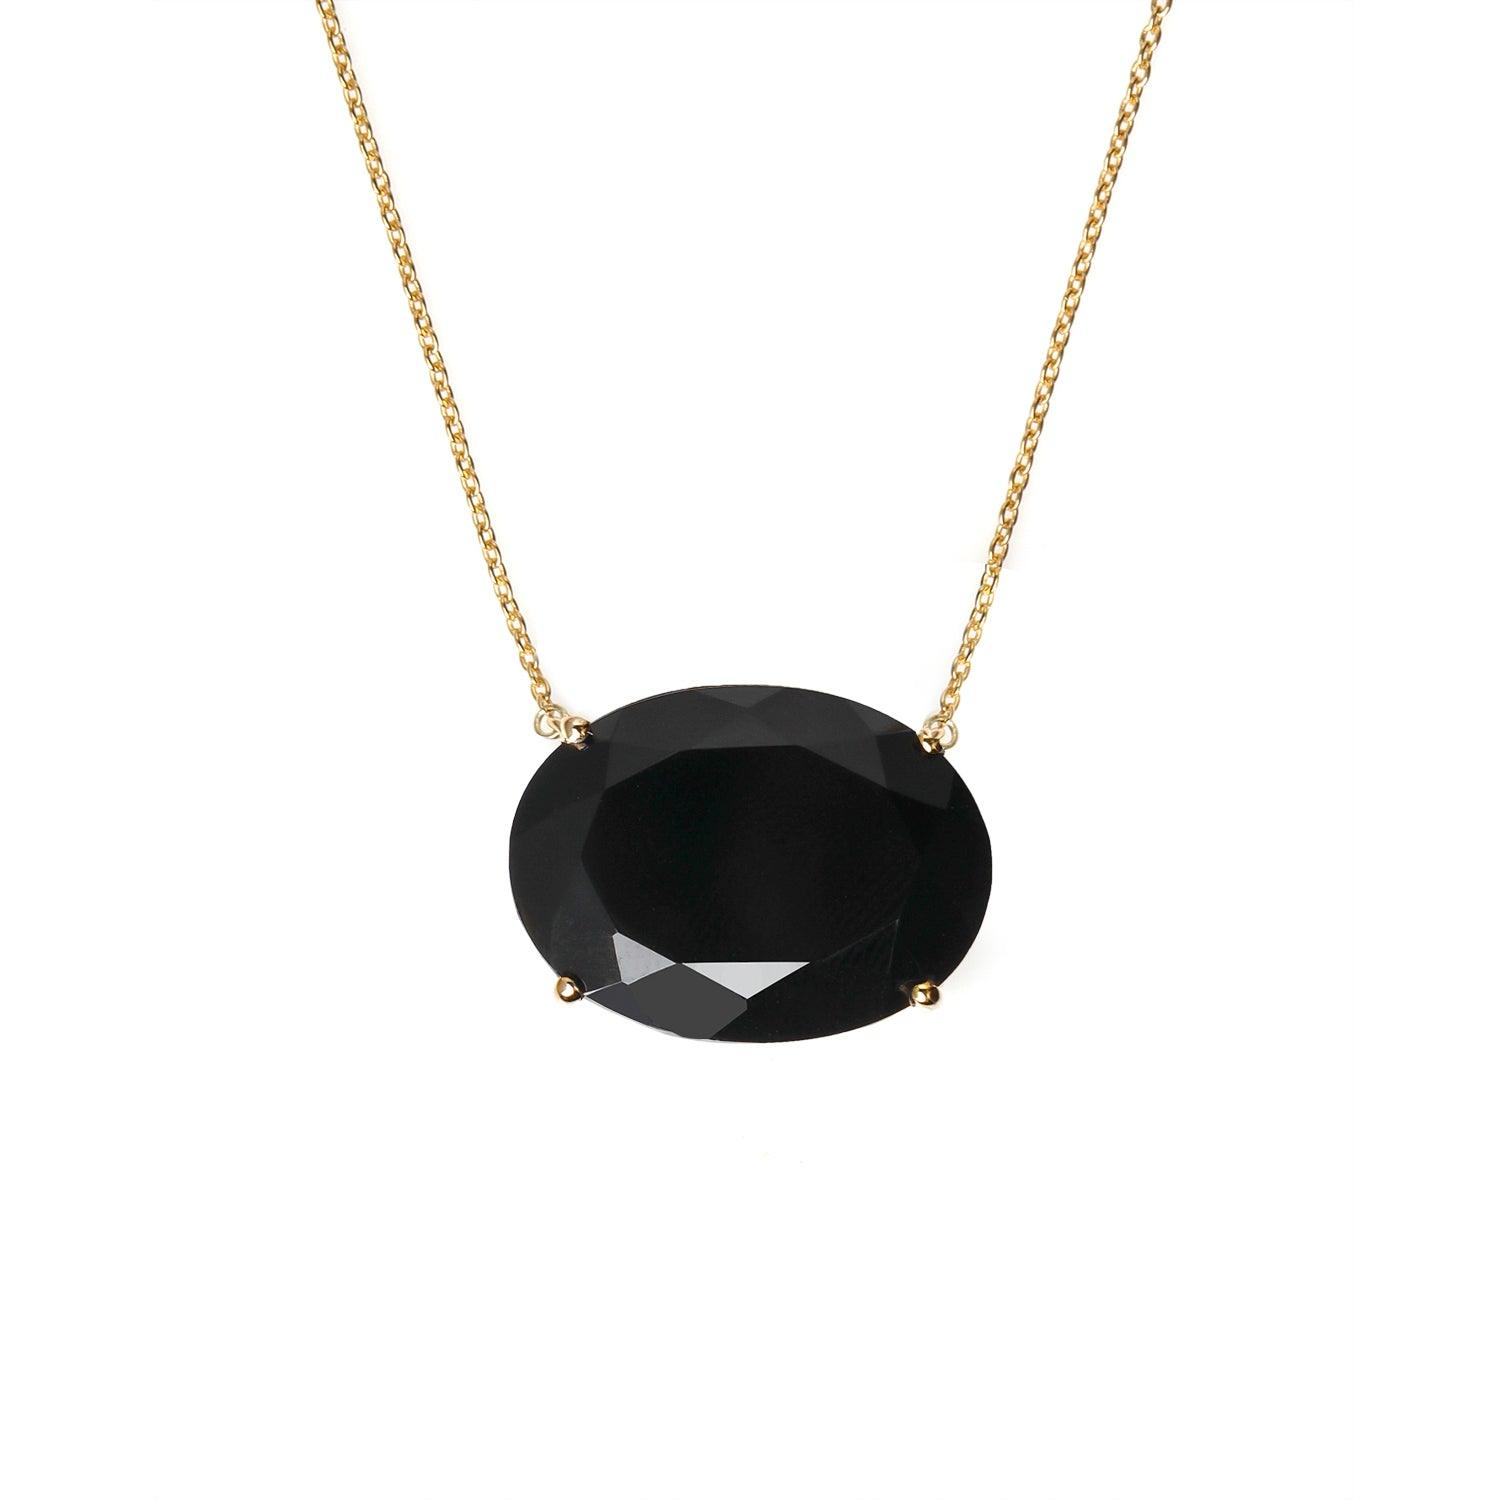 Black Onyx Necklace 14K Gold Plated 925 Silver Chain Pendant Necklace Jewelry - YoTreasure